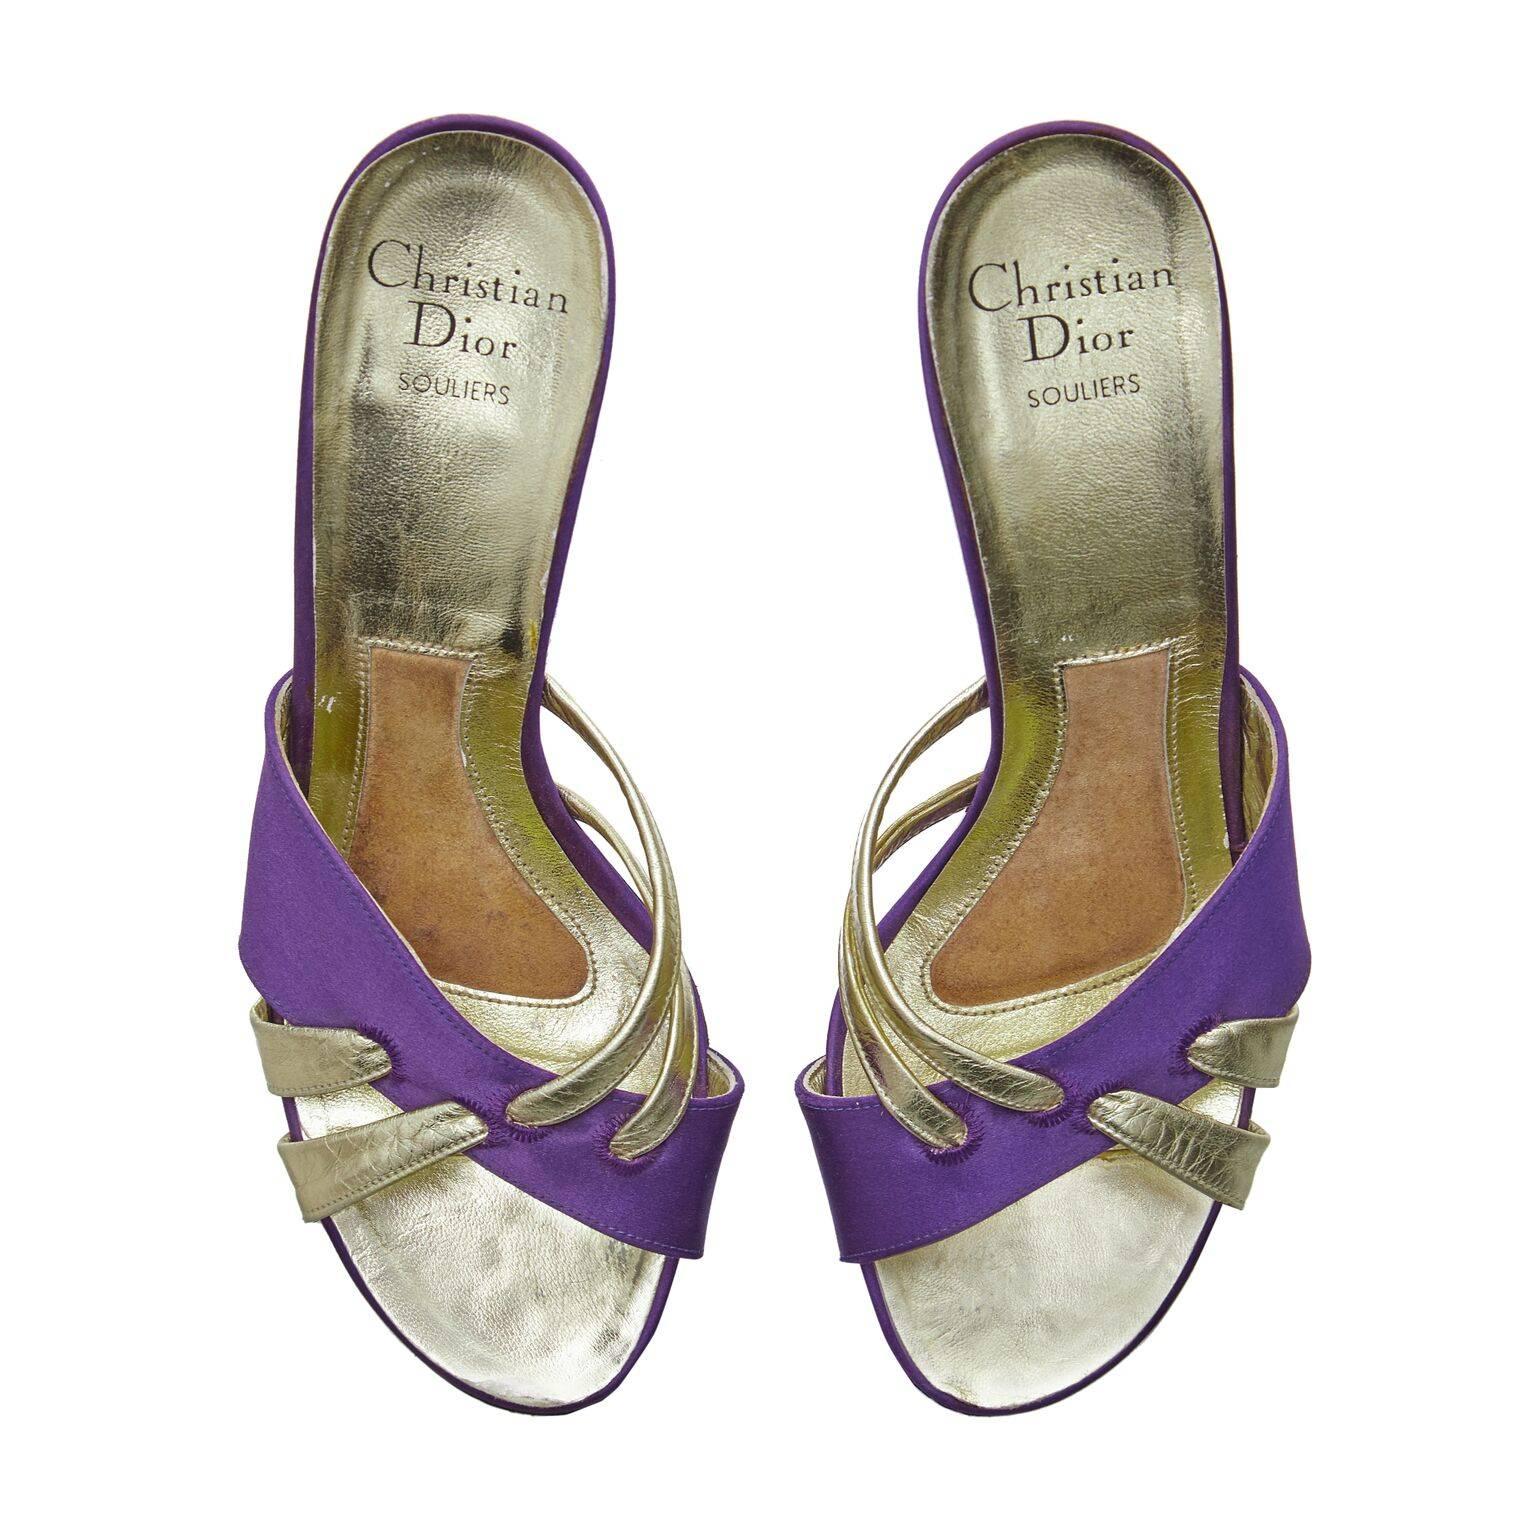 These exquisite 1970s Christian Dior heeled sandals with cross toe detail are beautifully made and in impeccable condition. There is a 3 inch cone heel with open back and toes. Rich purple satin fabric crossing with a gold tone leather double strap